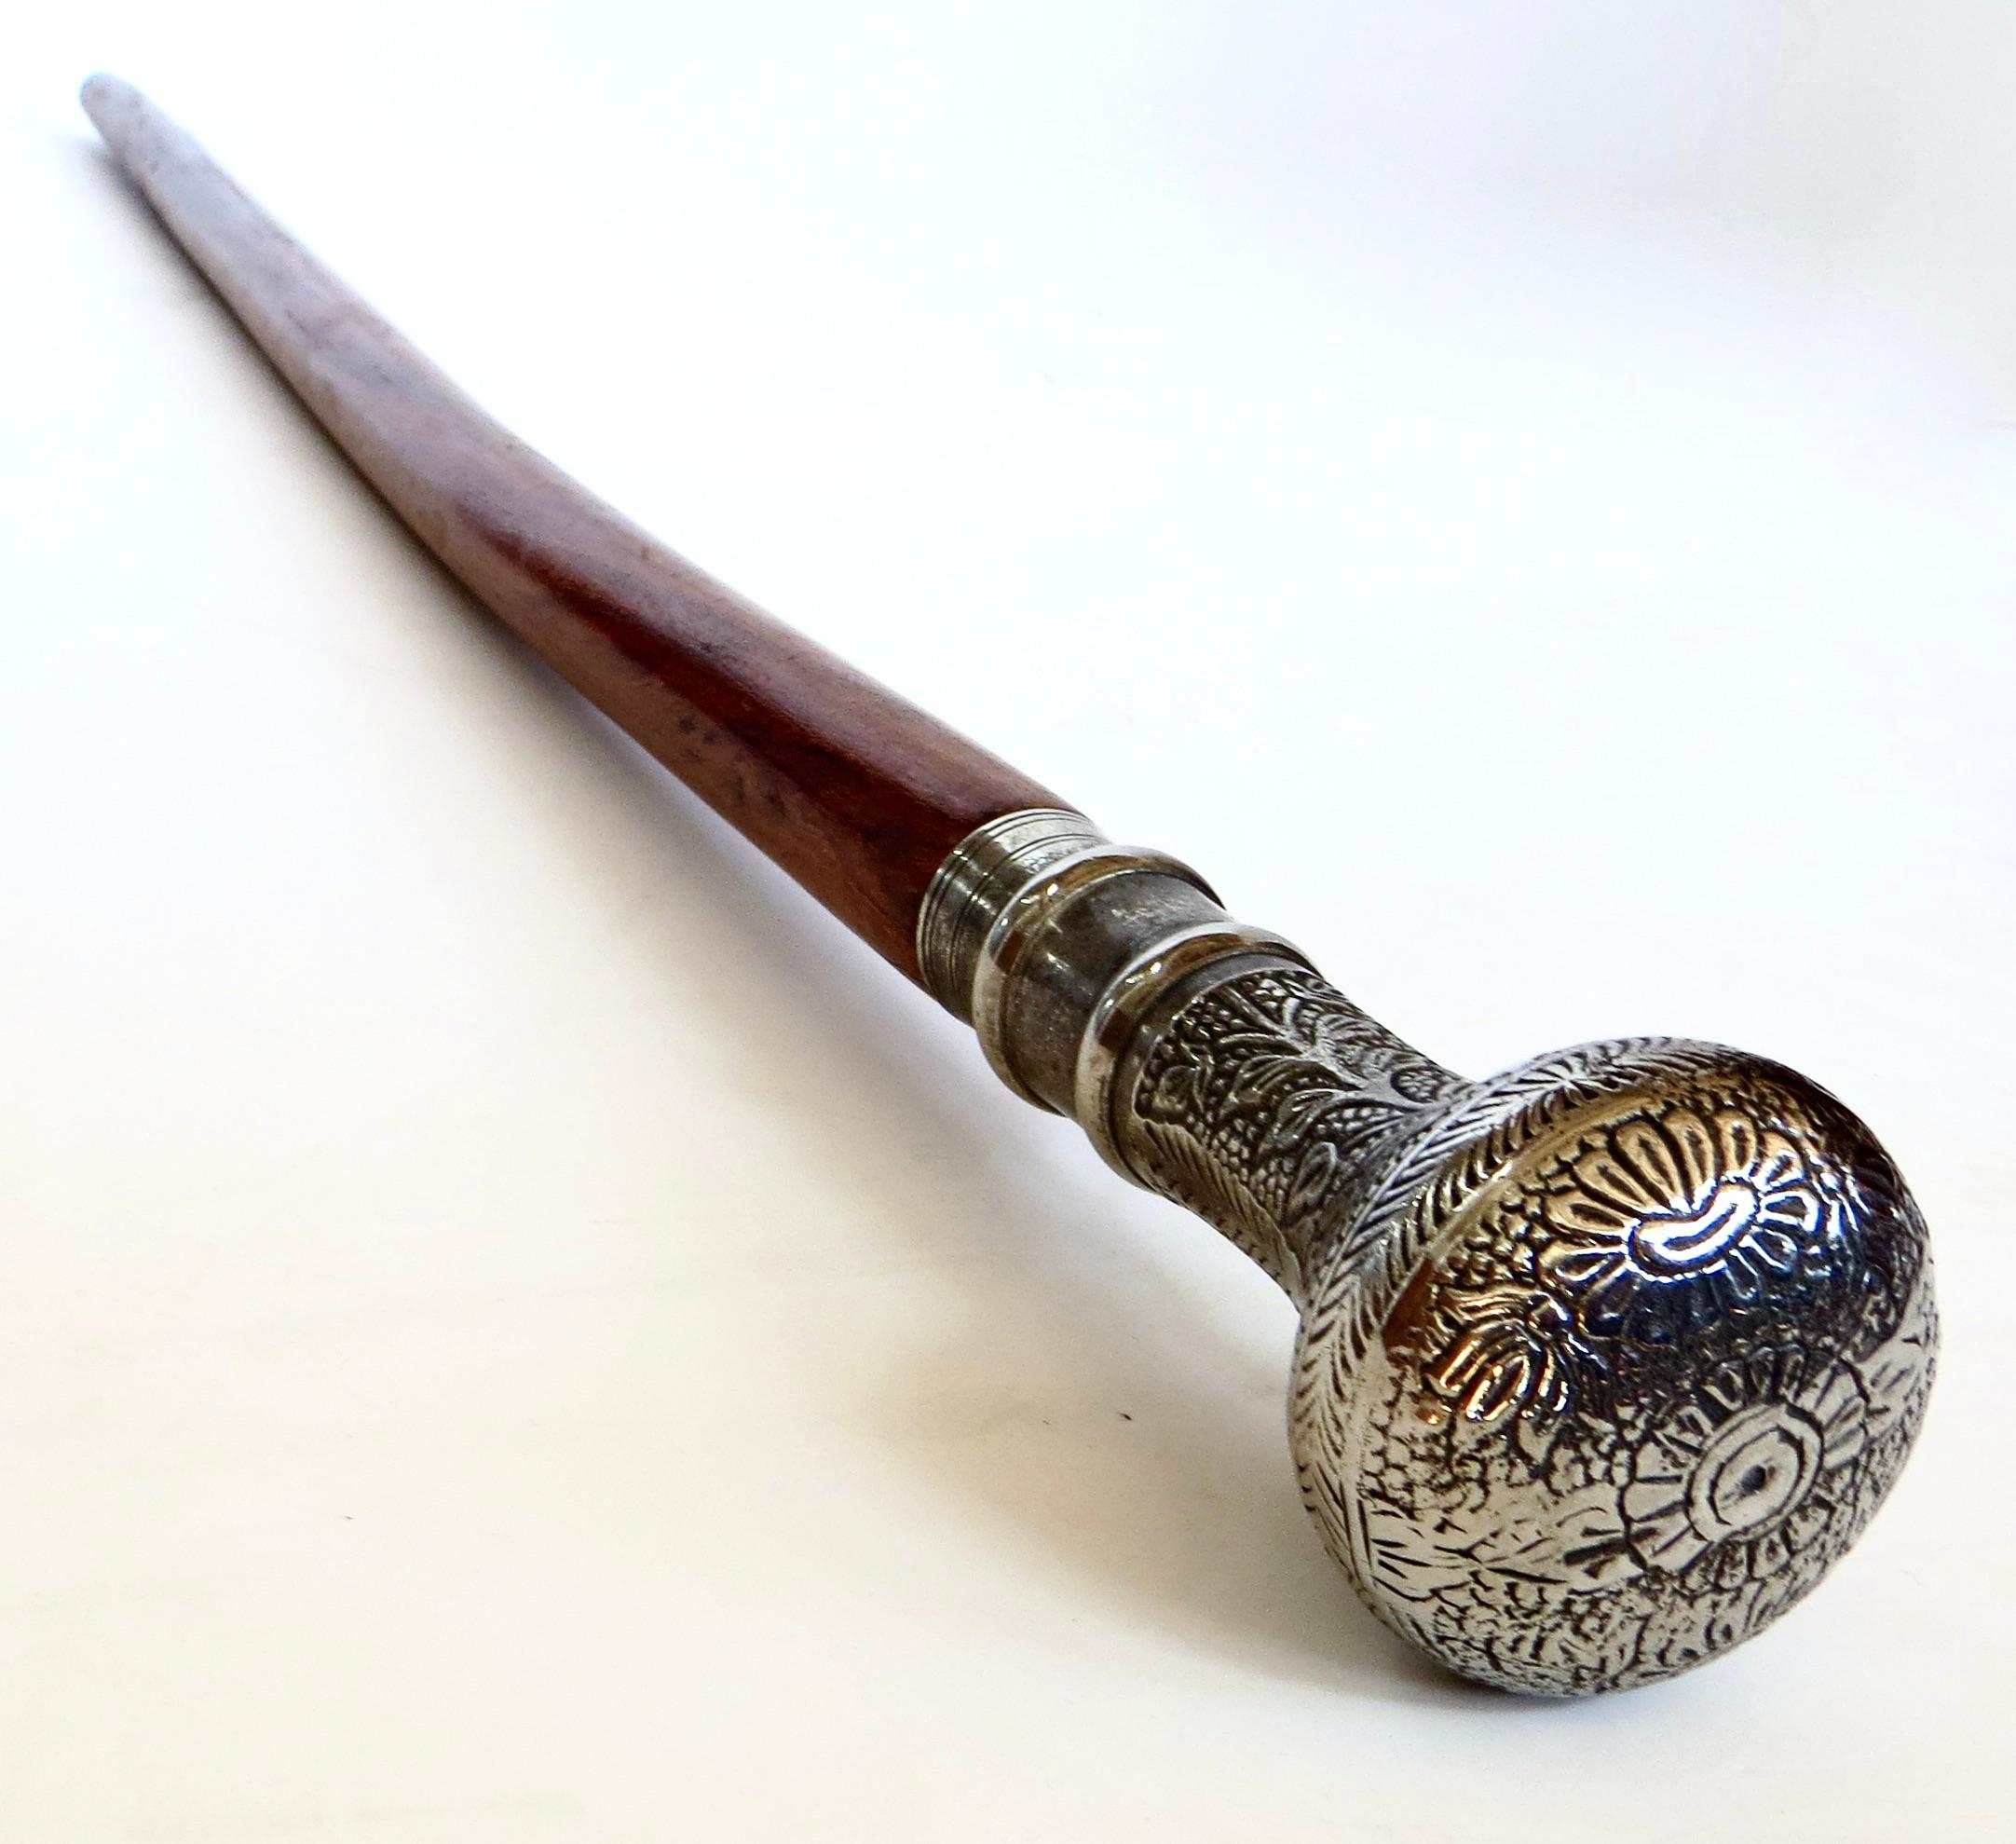 Repoussé 19th C Walking Stick With Silver Plate Handle Top Above Hand Carved Cane For Sale